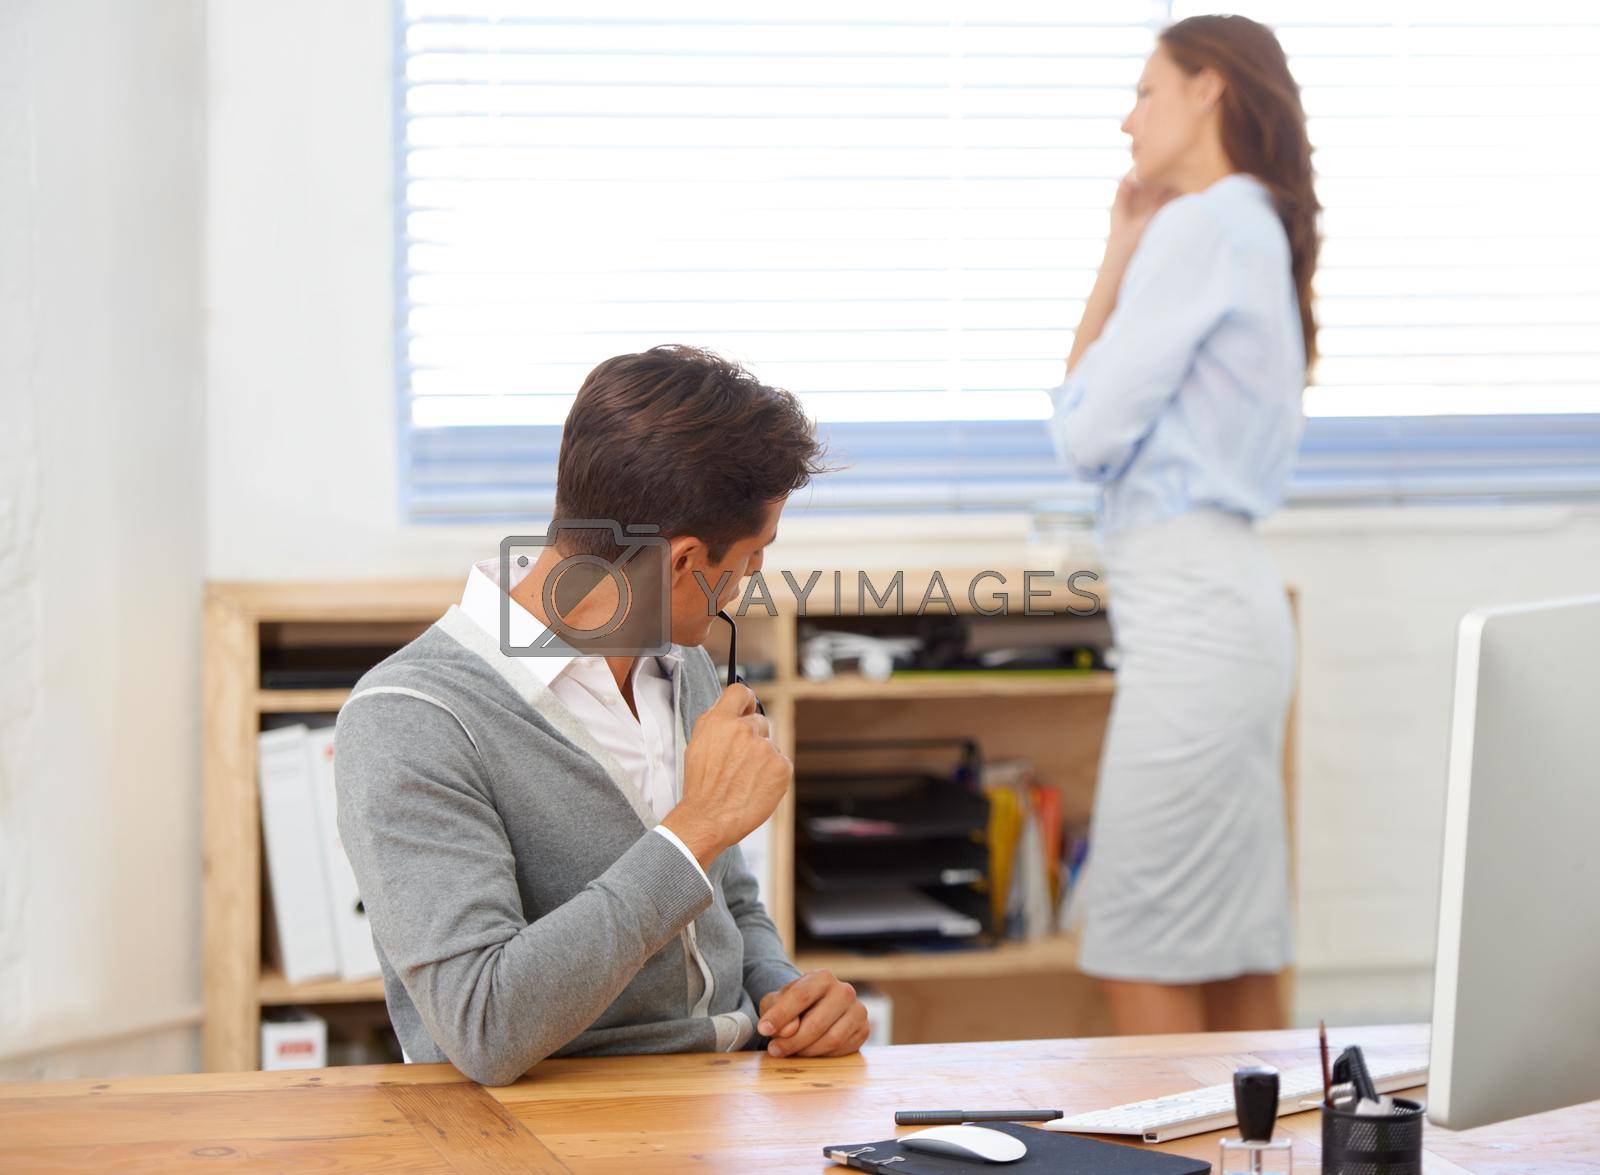 Royalty free image of Improper office etiquette. A businessman checking out his female colleague. by YuriArcurs